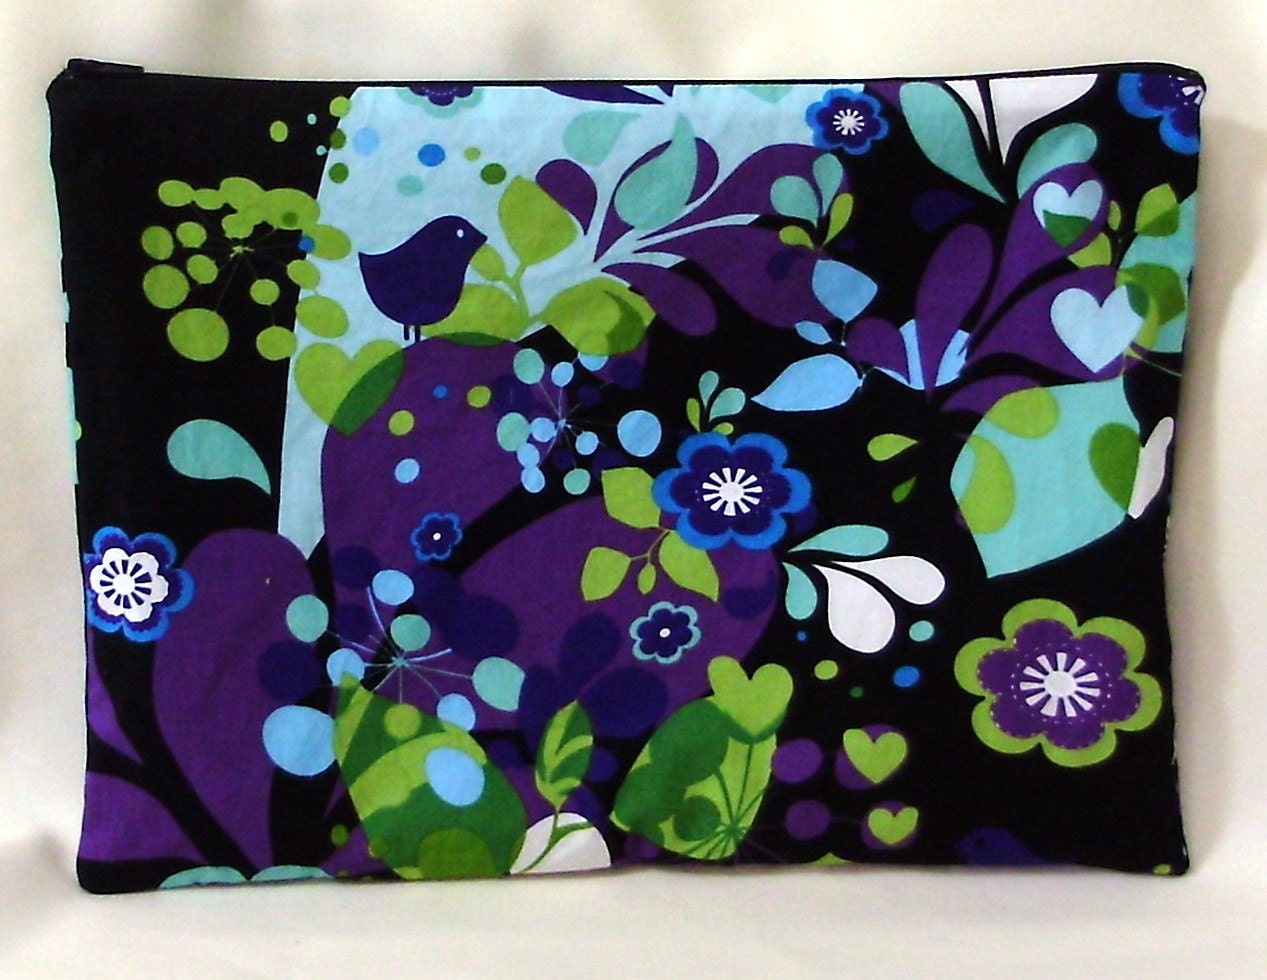 Spring Fever Funky Floral Black Zippered Pouch, Cosmetic Bag, Makeup Bag, Black, Purple, Blue, Green